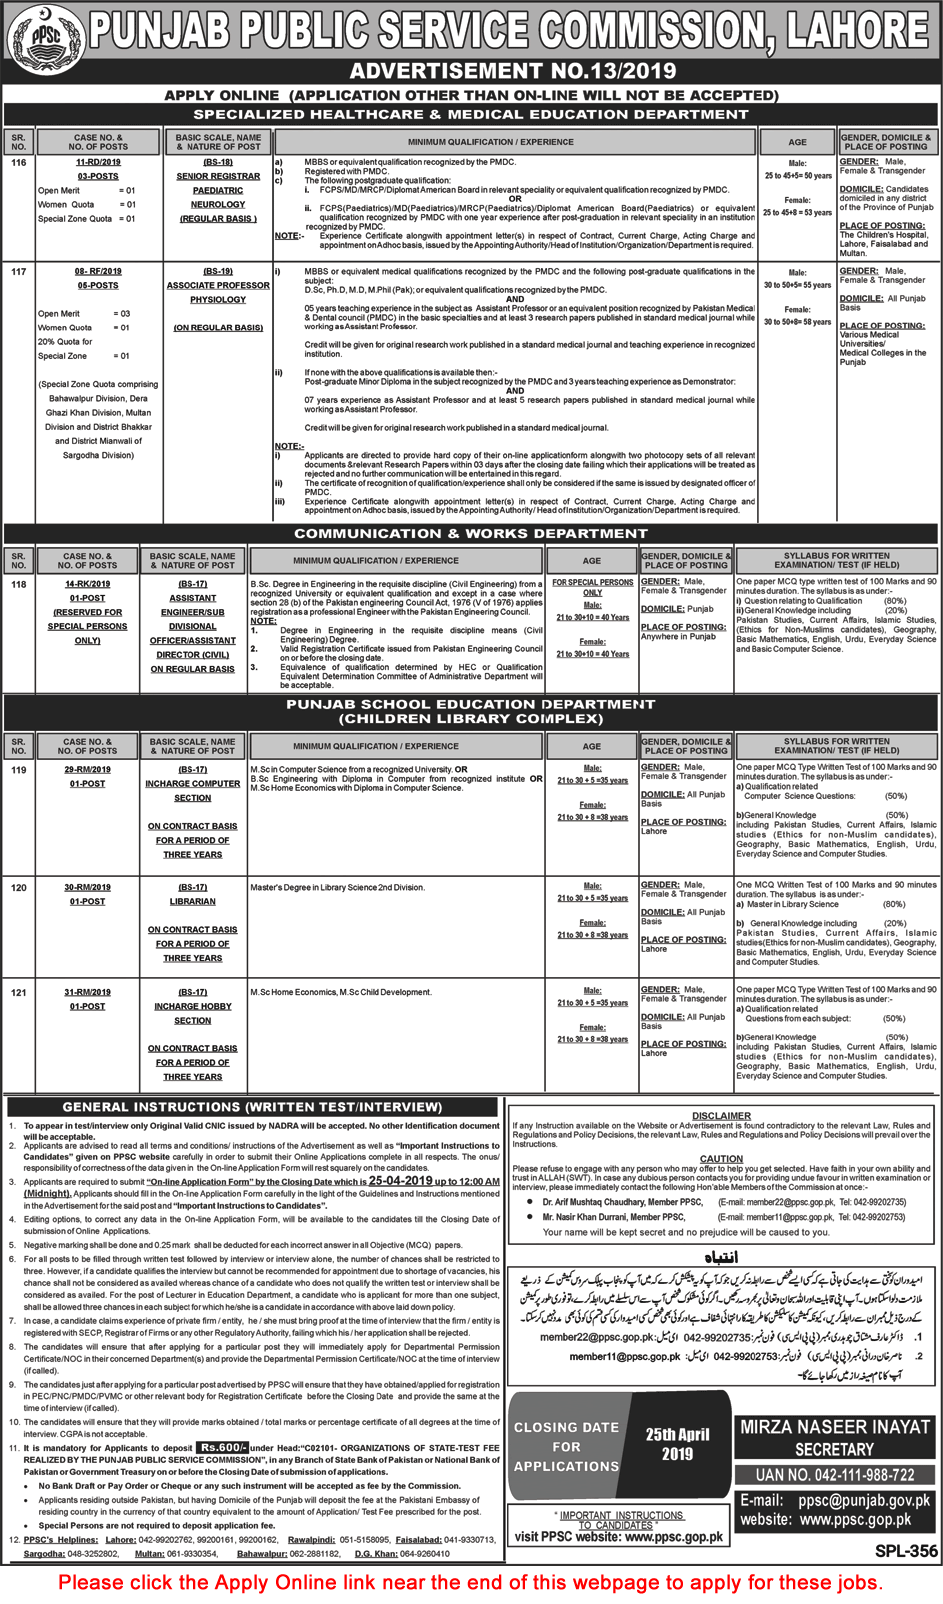 PPSC Jobs April 2019 Apply Online Consolidated Advertisement No 13/2019 Latest